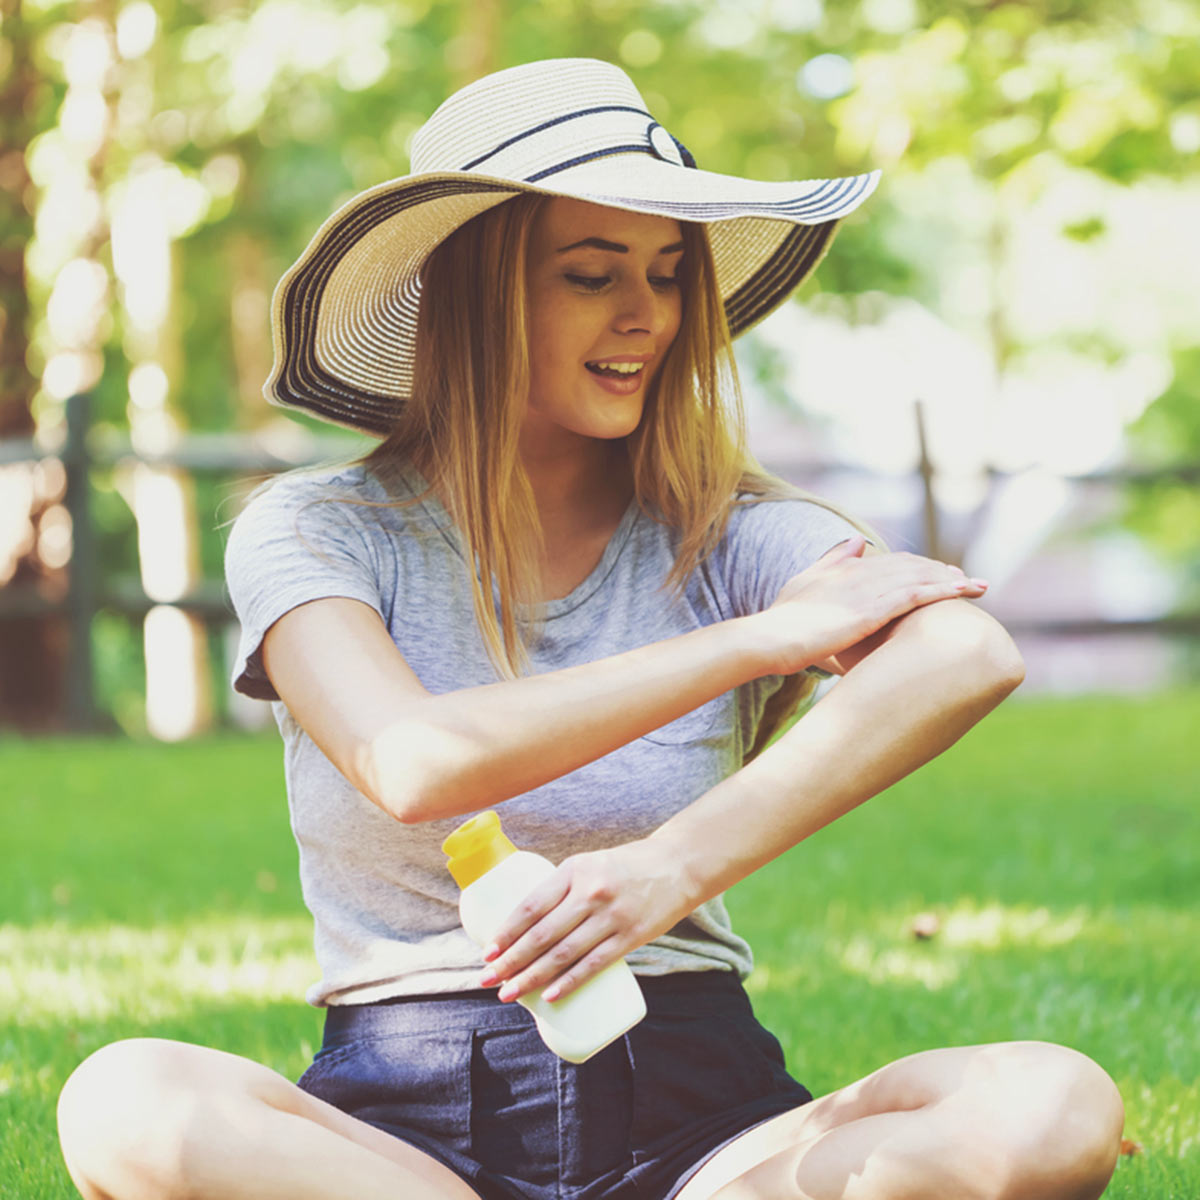 A young woman sits cross-legged in a green park on a sunny day. She is wearing a wide-brimmed hand and applying sunscreen lotion.